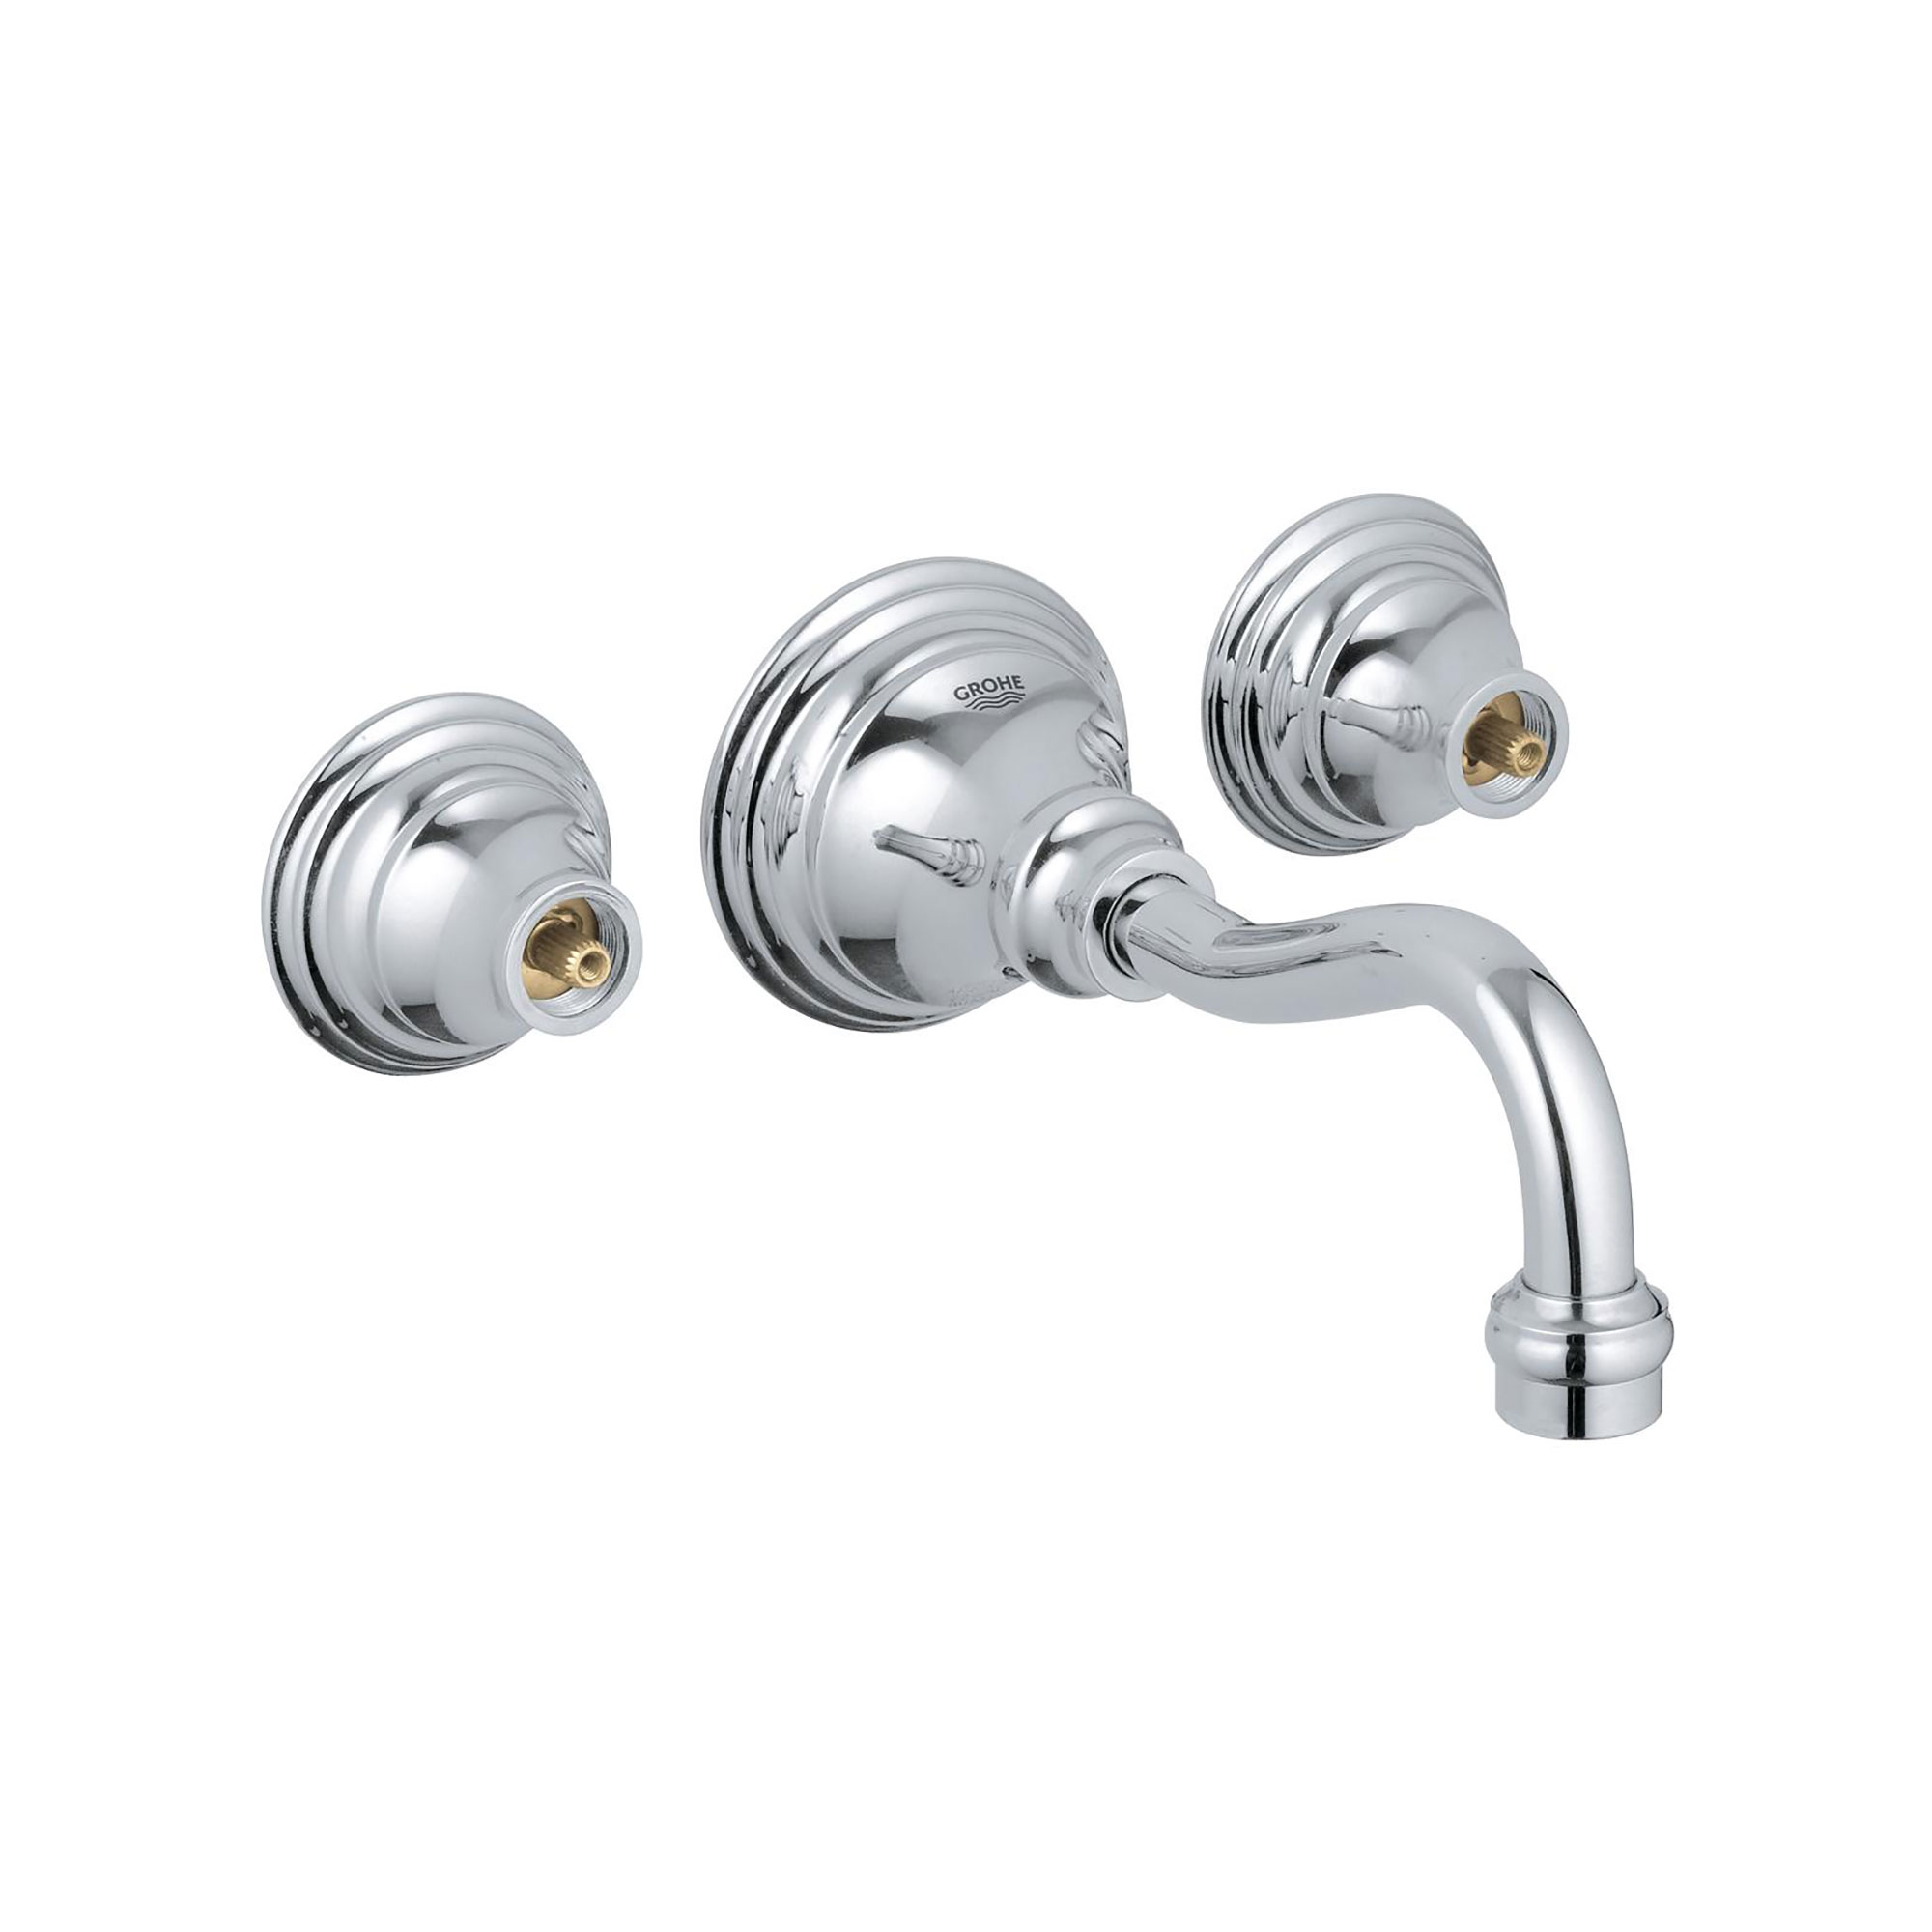 2-Handle Wall Mount Faucet 5.7 L/min (1.5 gpm)